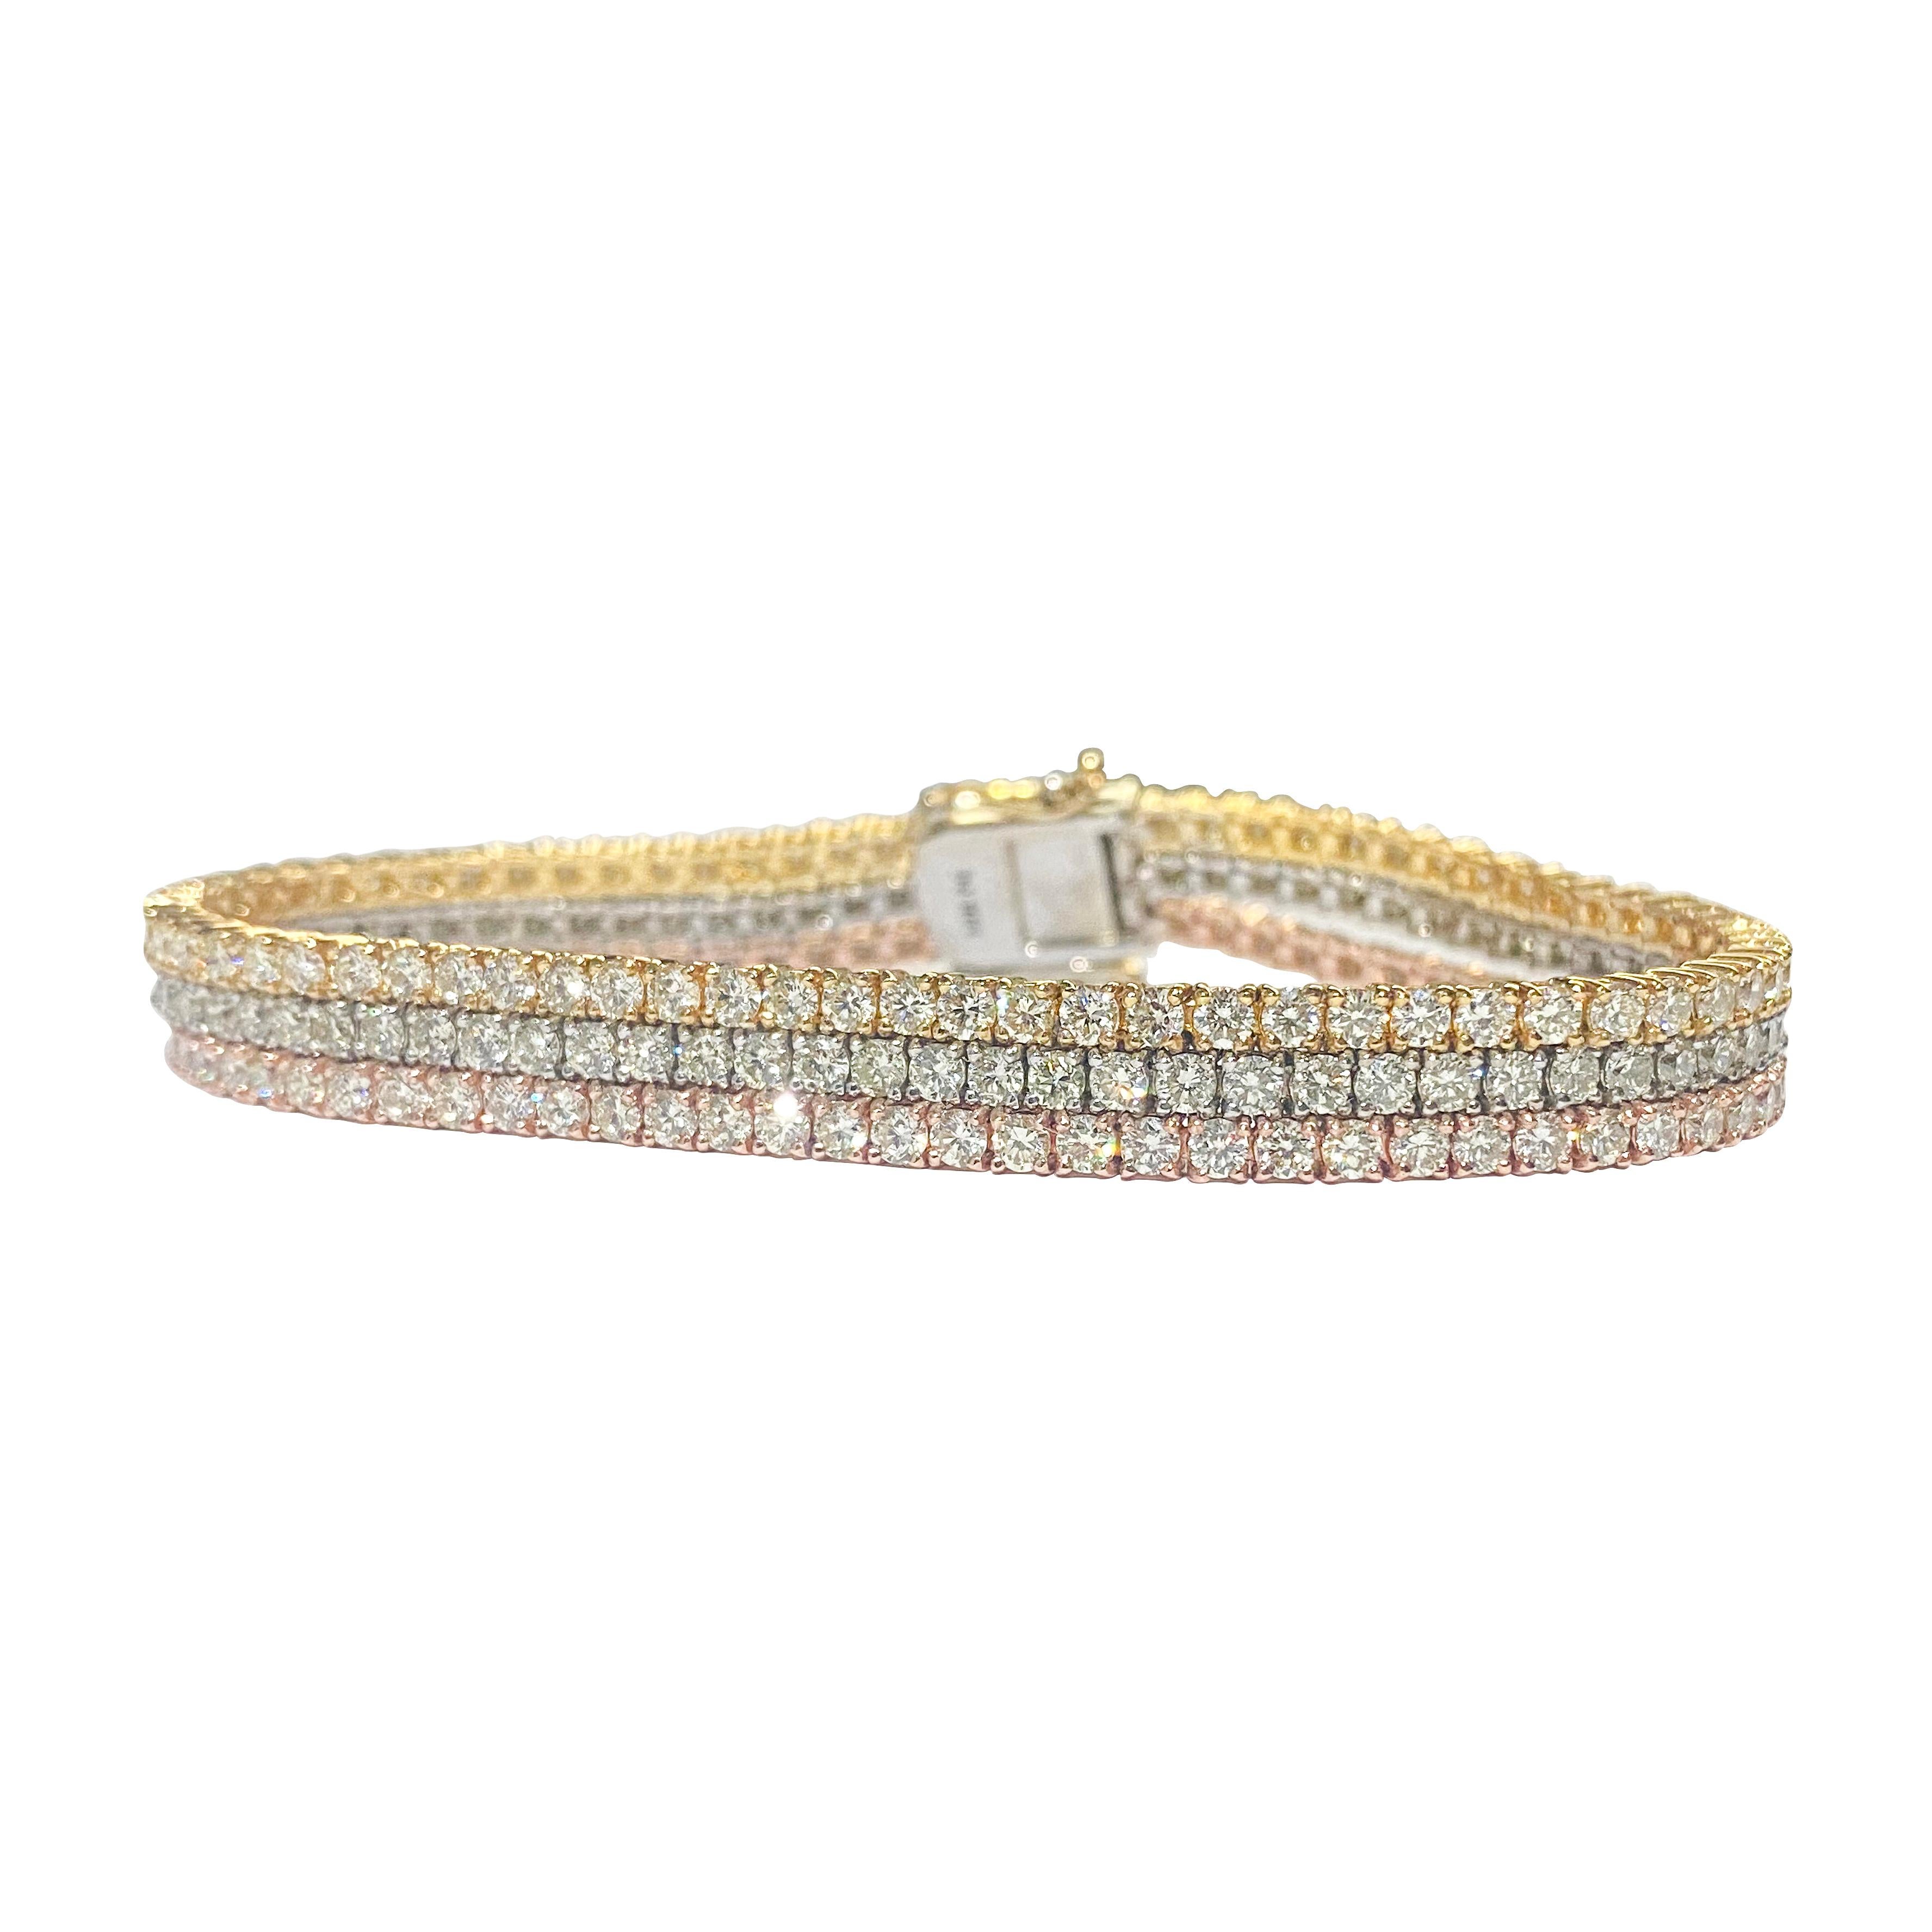 Introducing our exquisite Trio Color Diamond Tennis Bracelet, meticulously crafted from solid 10k gold in yellow, rose, and white hues. Adorned with a dazzling array of round brilliant cut diamonds totaling 10.50 carats, boasting VVS-VS clarity and